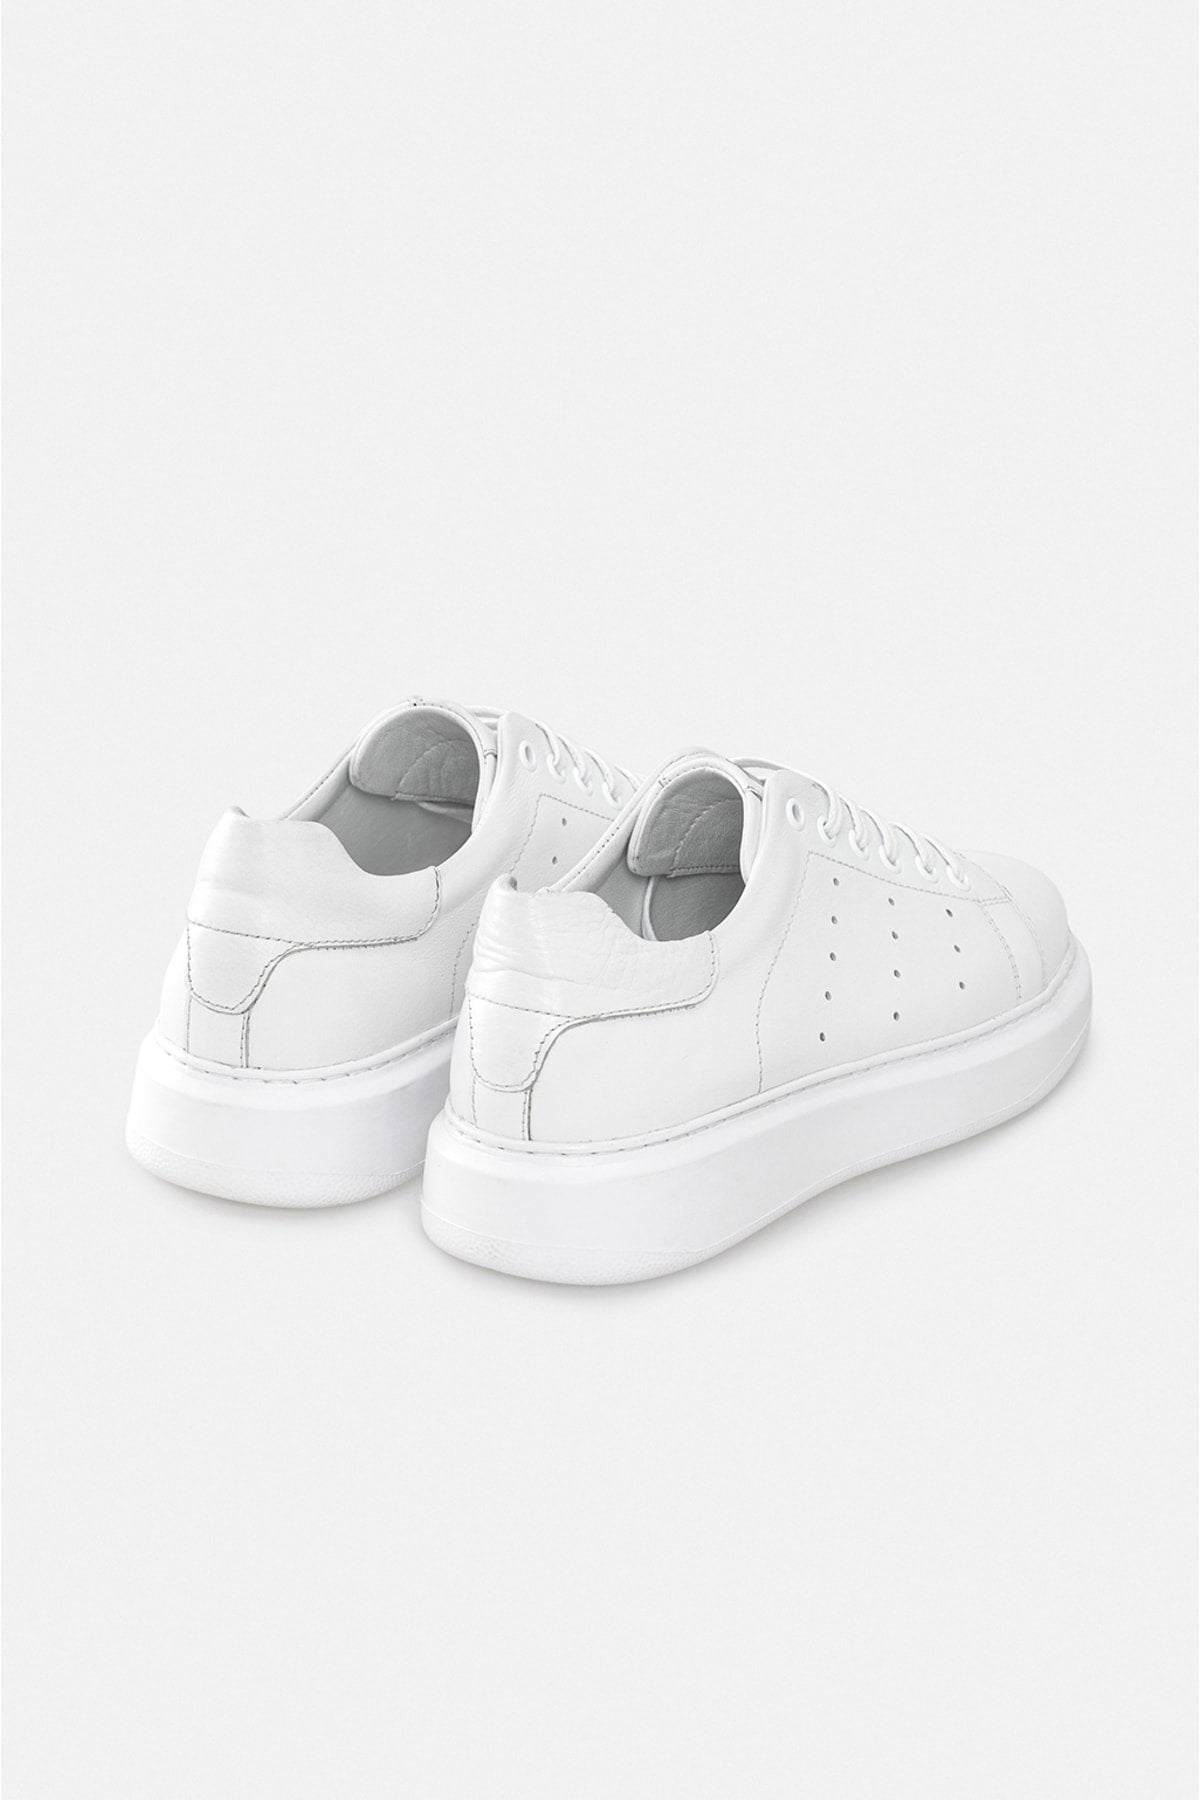 White 100 %Leather Sneaker Shoes